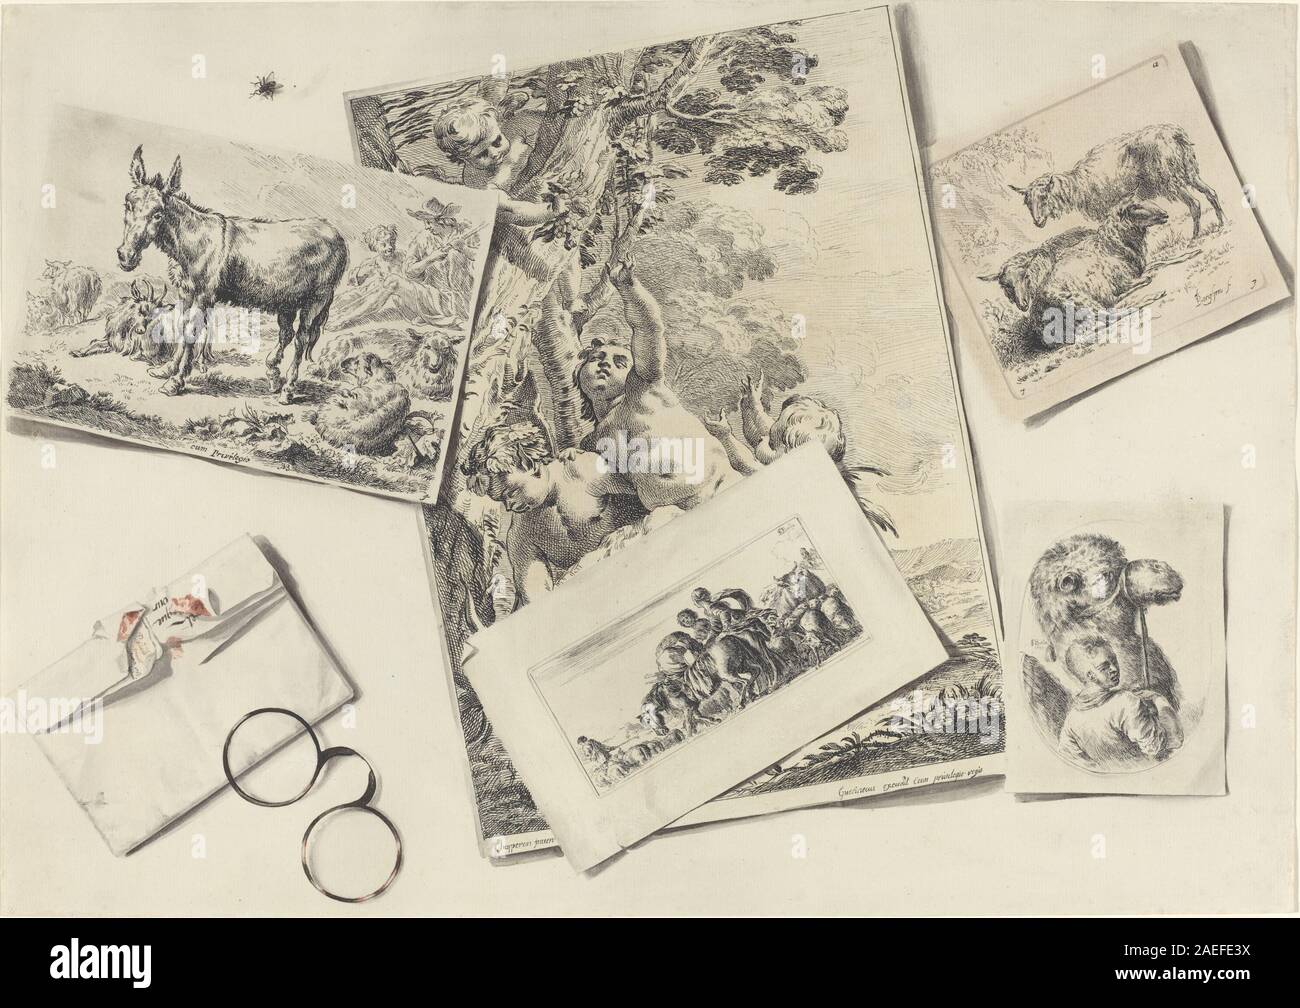 Jean-Pierre-Xavier Bidauld after Various Artists, Trompe l'Oeil - Old Prints, a Torn Envelope with Horn-rimmed Glasses, and a Housefly, 1763 Trompe l'Oeil: Old Prints, a Torn Envelope with Horn-rimmed Glasses, and a Housefly; 1763date Stock Photo